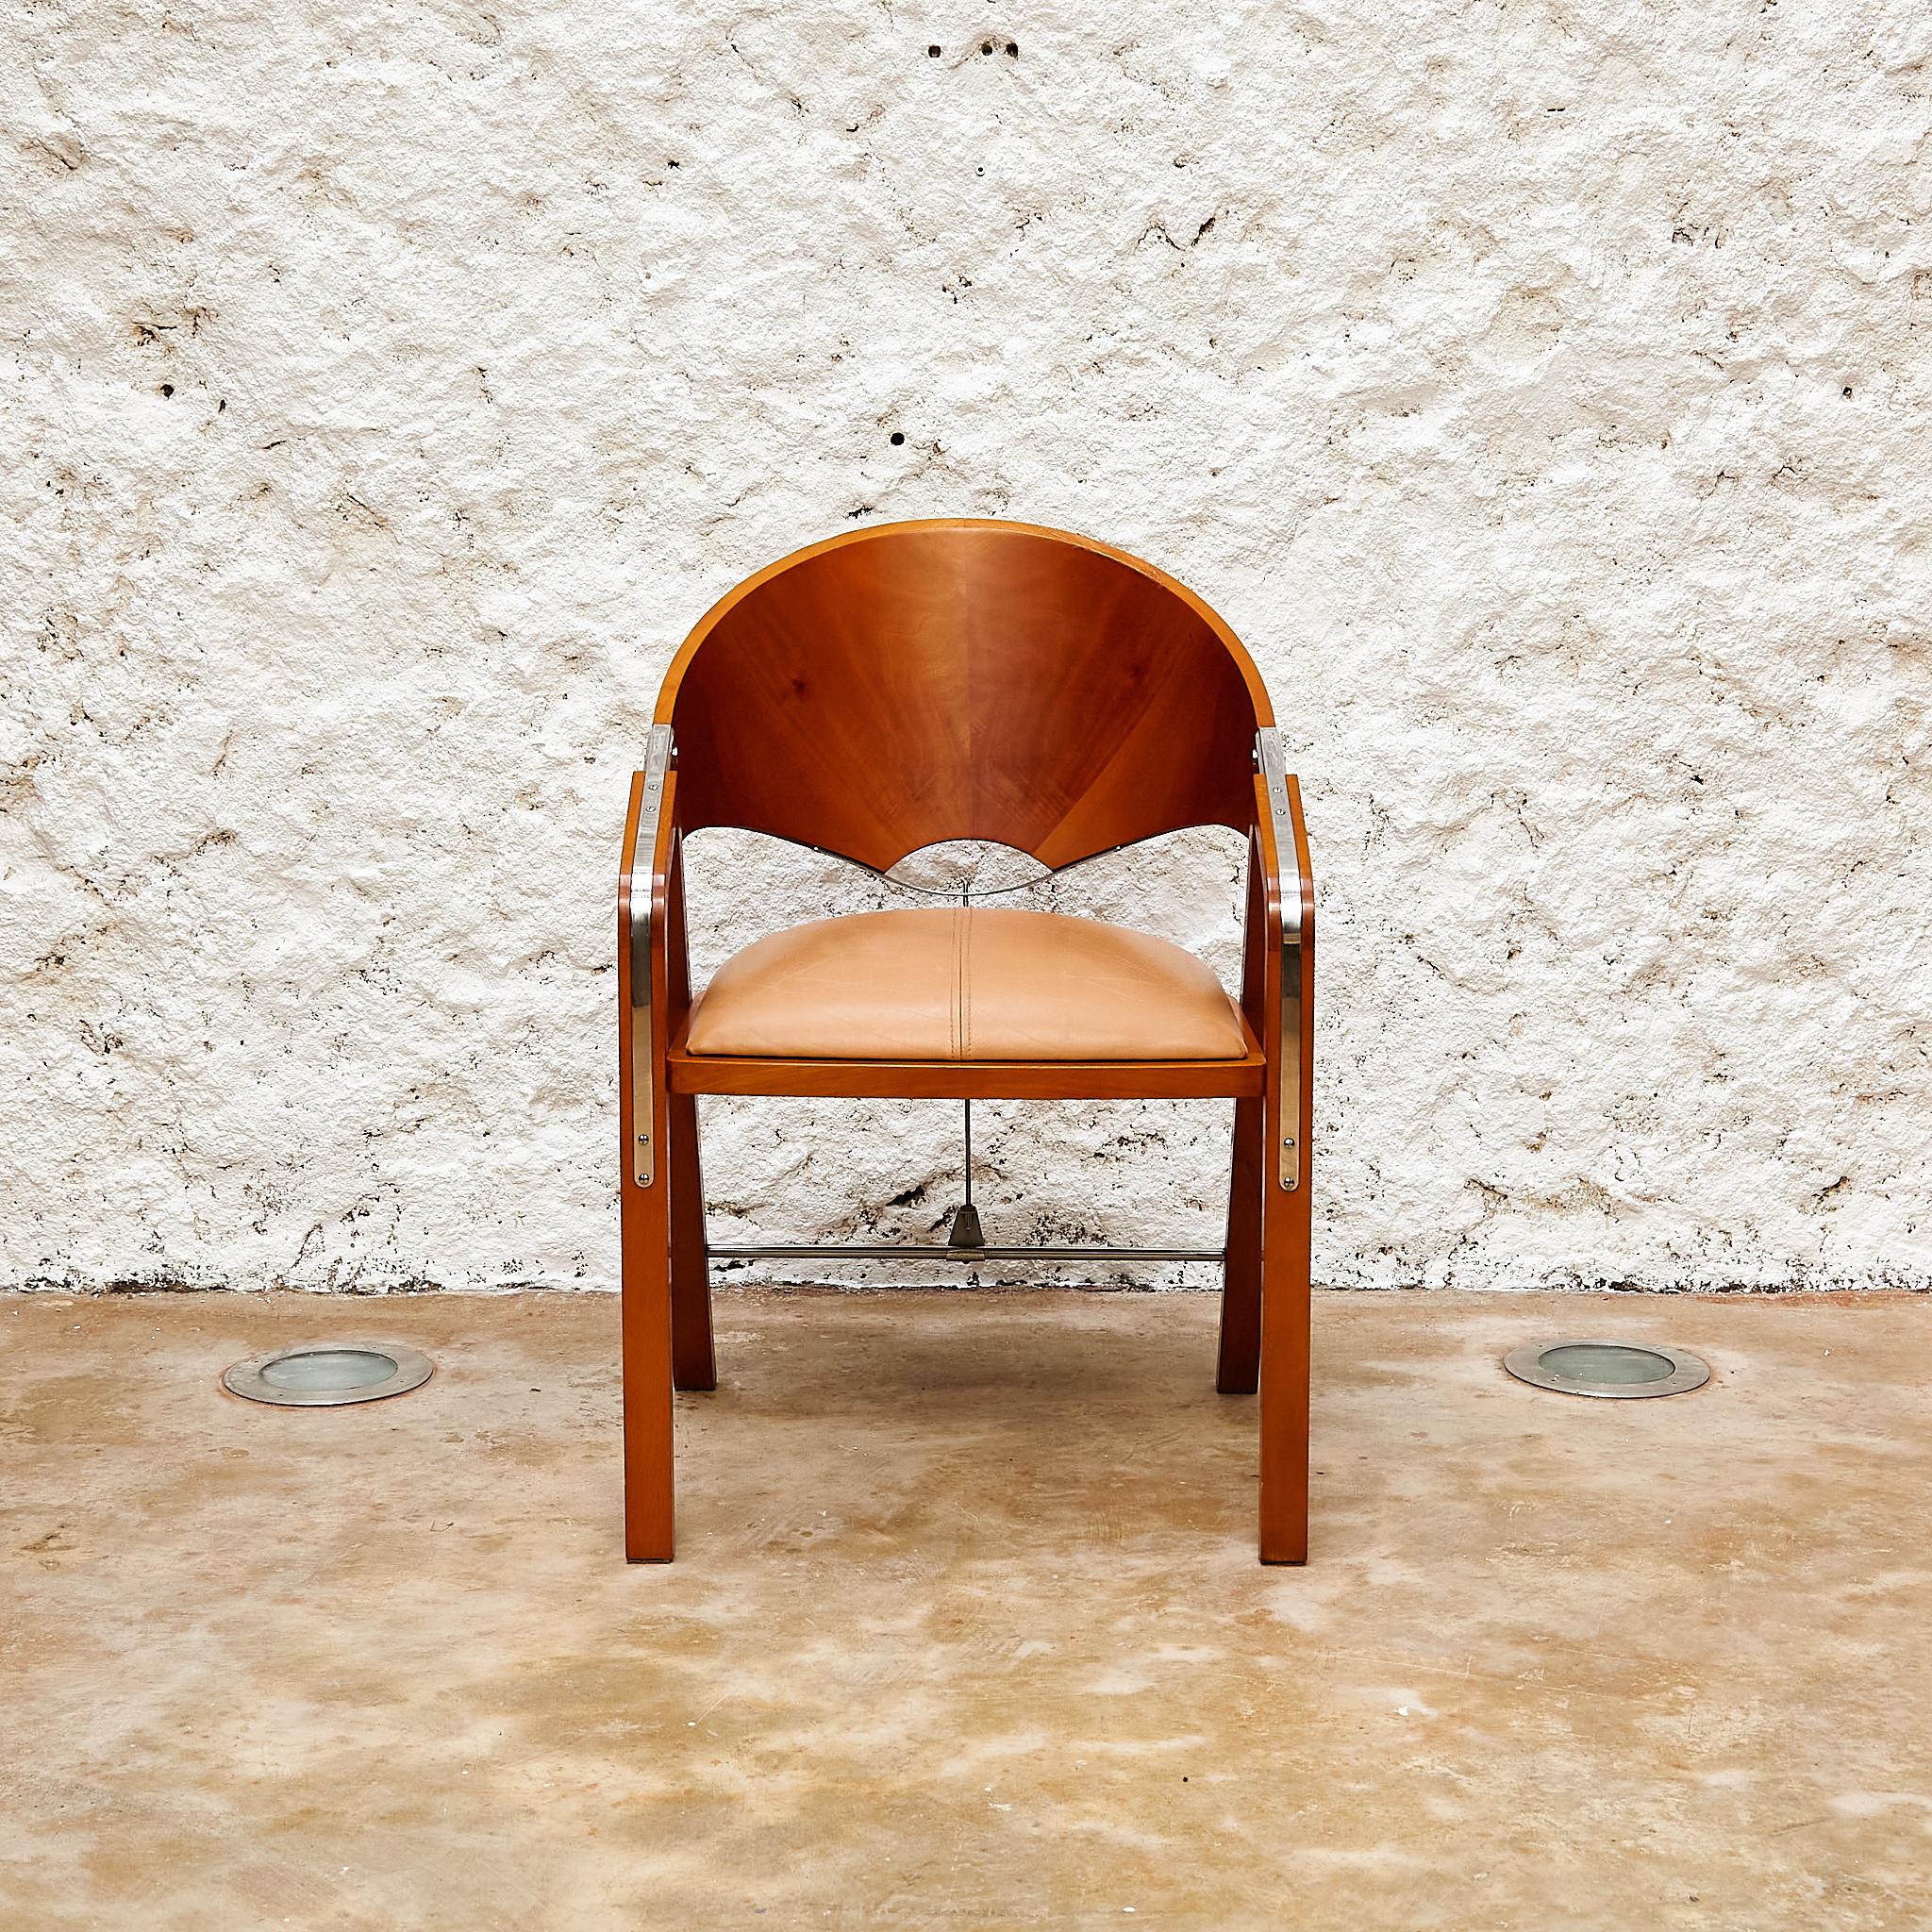 The Vintage 'Spinnaker' Chairs by Jamie Tresserra - Wood, Metal and Leather In Good Condition For Sale In Barcelona, Barcelona